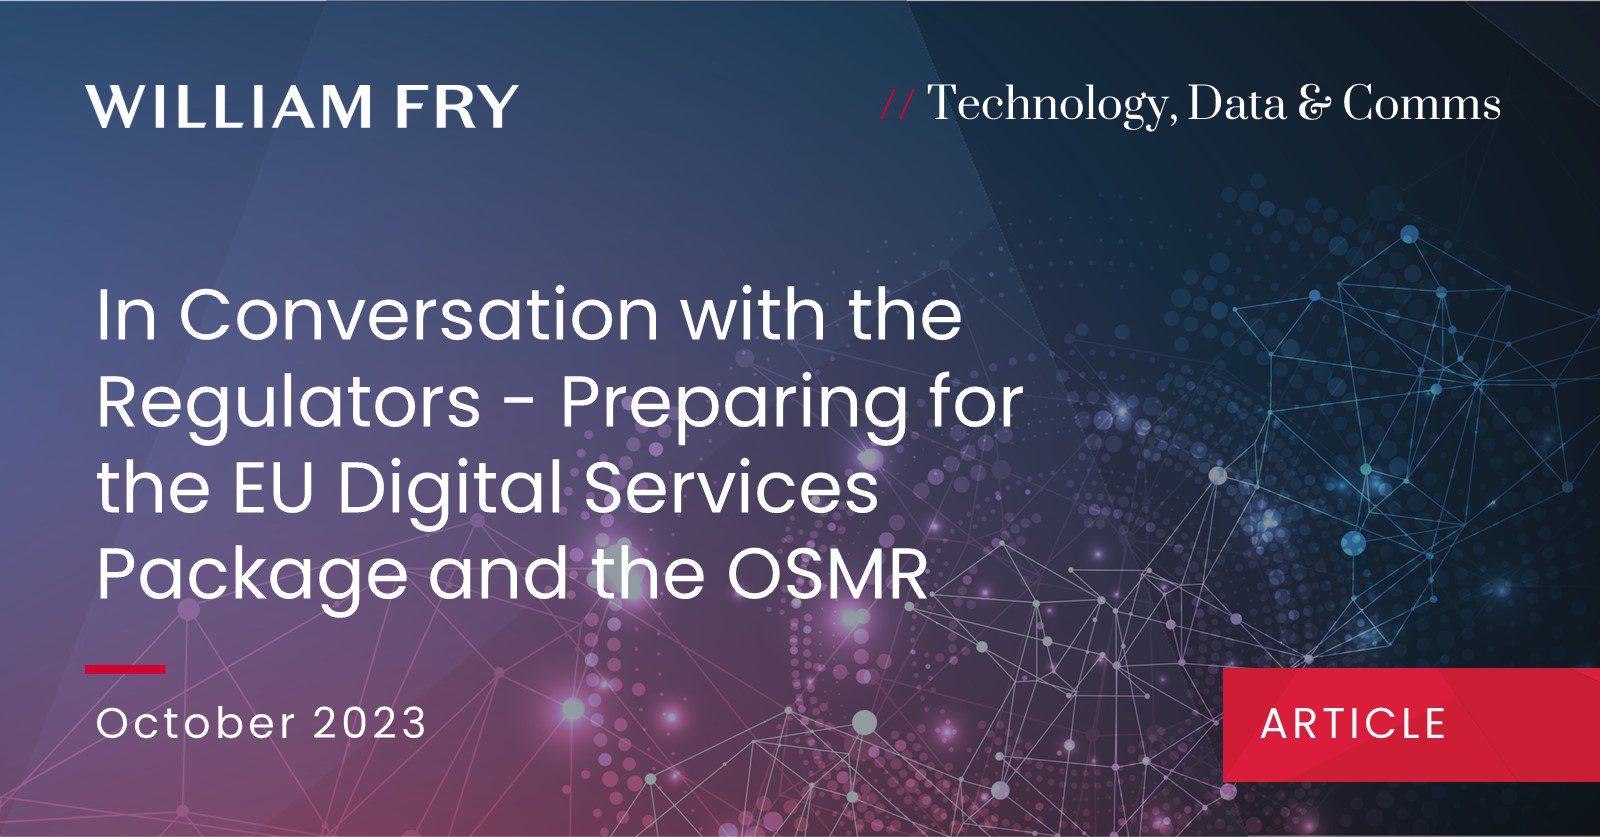 In Conversation with the Regulators - Preparing for the EU Digital Services Package and the OSMR